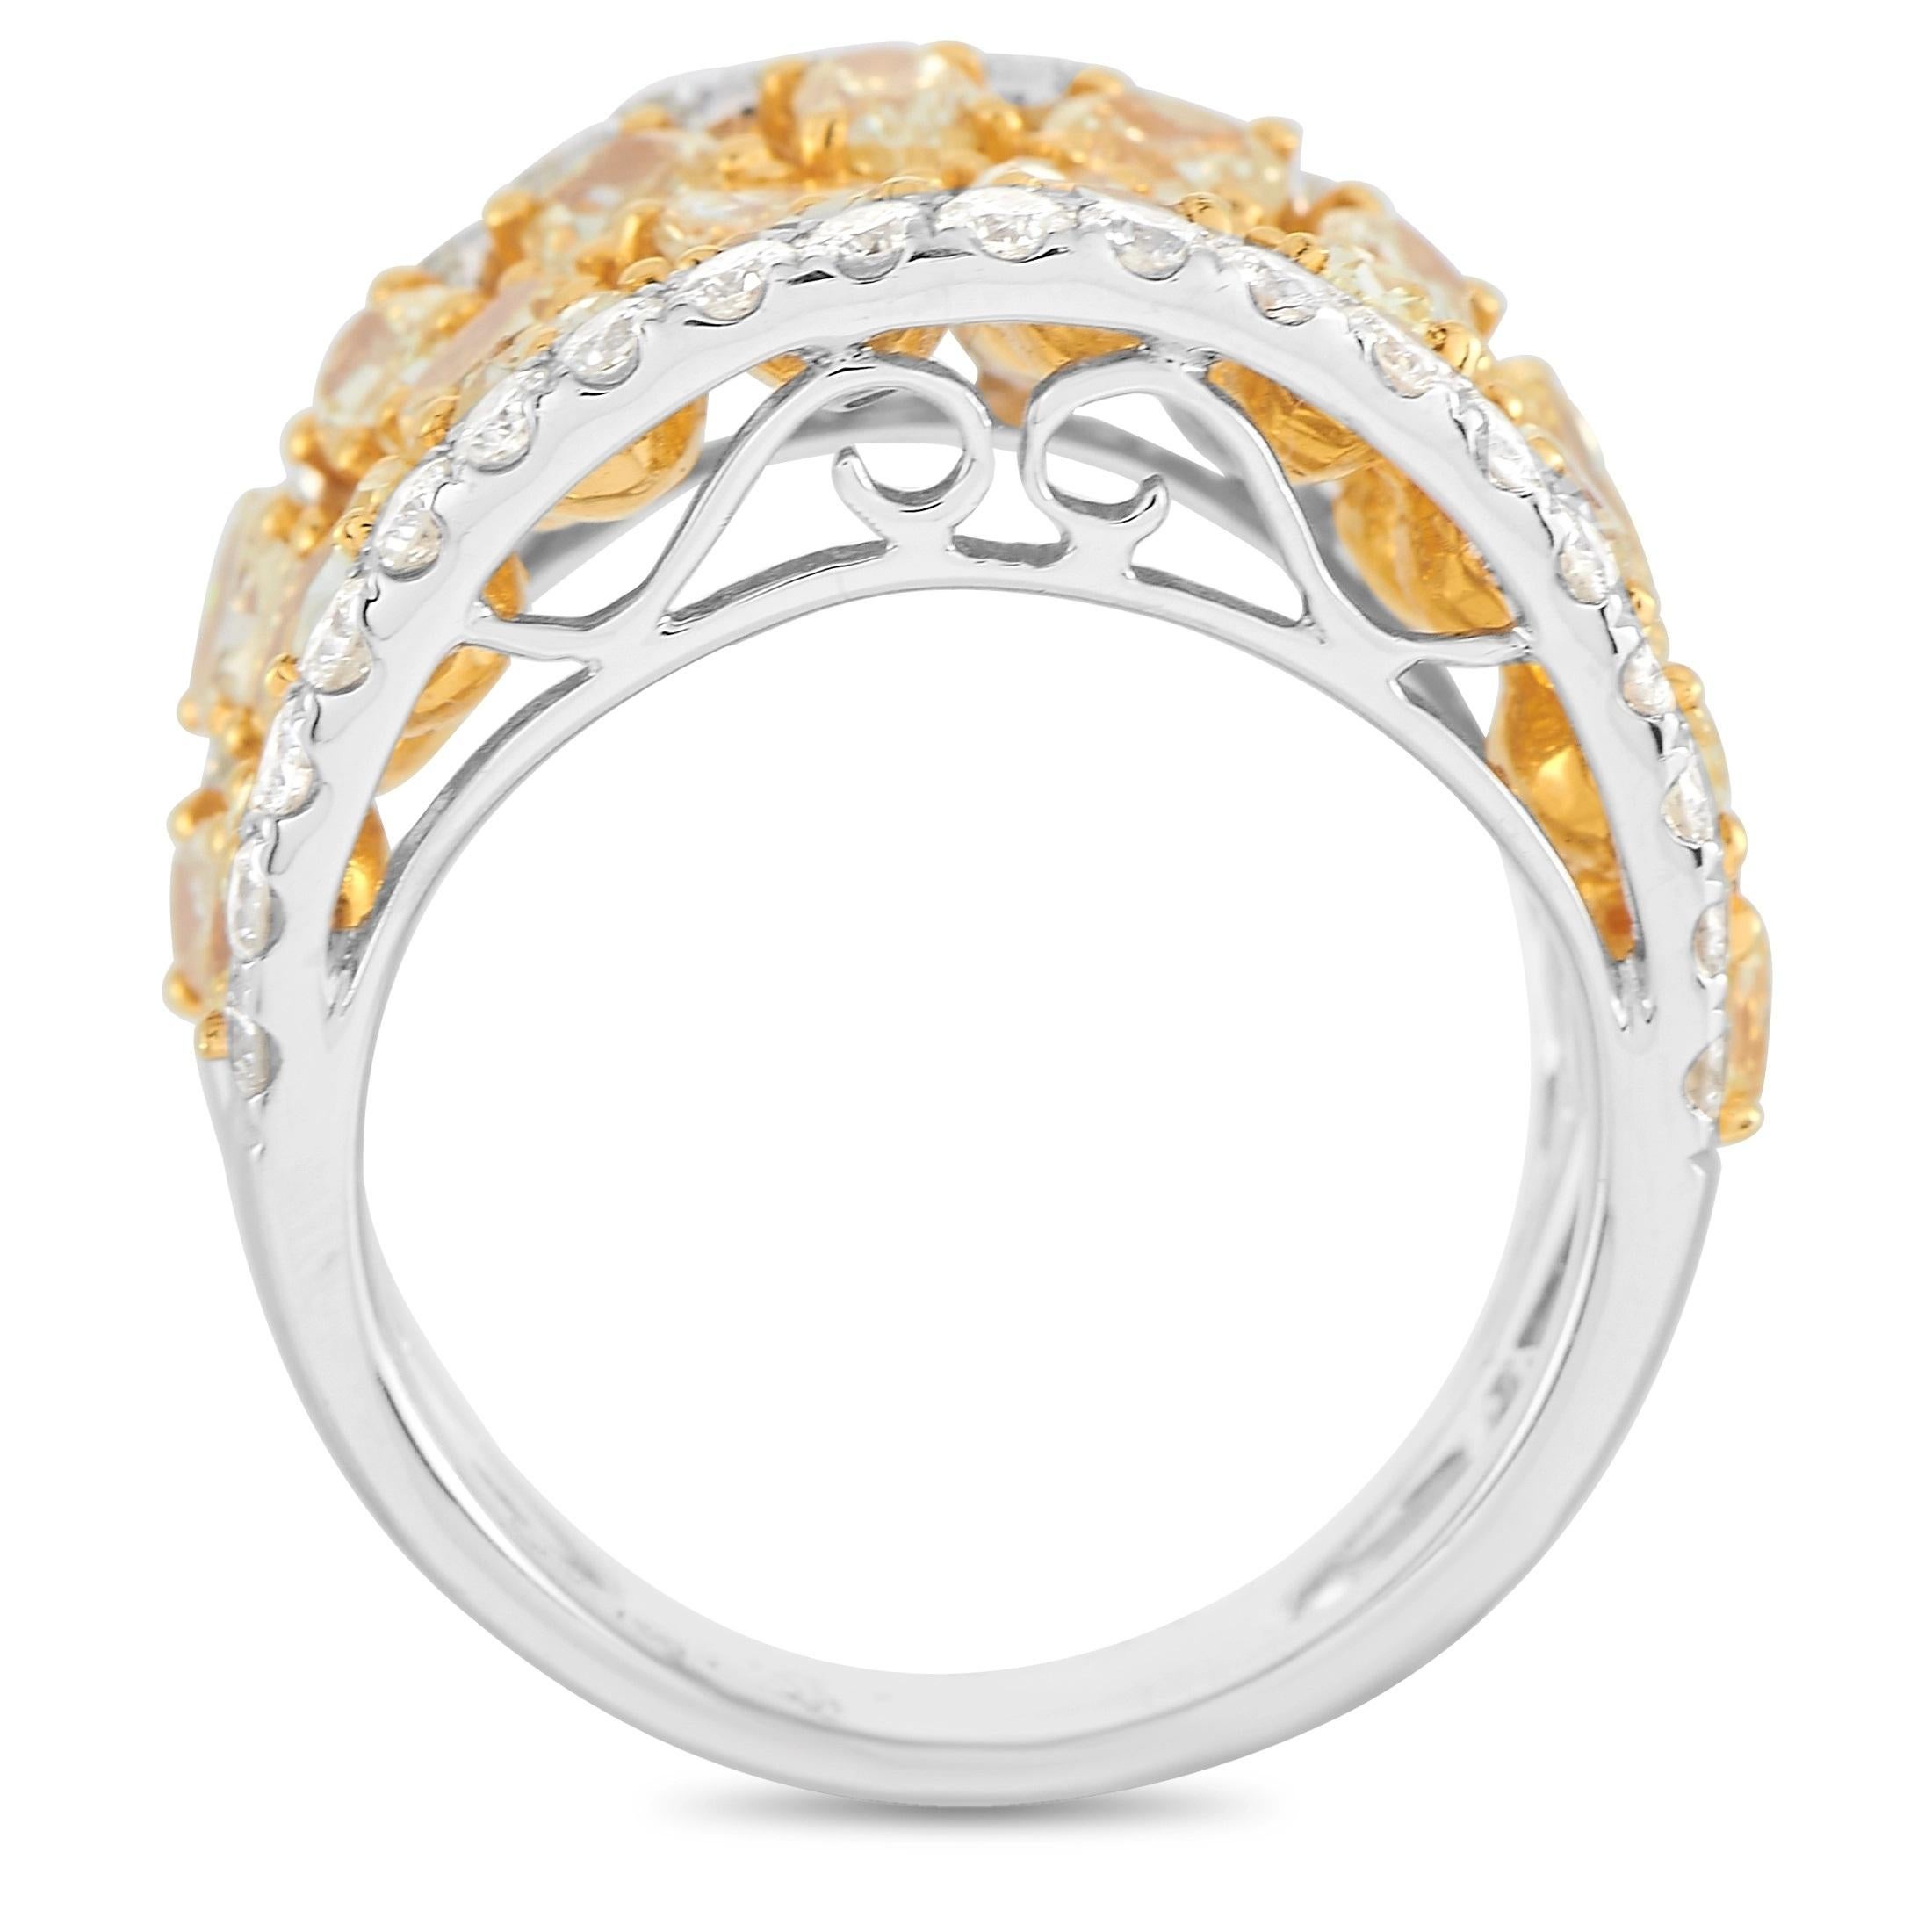 Designed to radiate glamour, no doubt!. The LB Exclusive 18K White Gold 5.06 ct Diamond Wide Band Ring is exquisitely crafted to feature 3.94 carats canary diamonds with an intriguing yellow brilliance. Pavé diamonds border the top and bottom edges